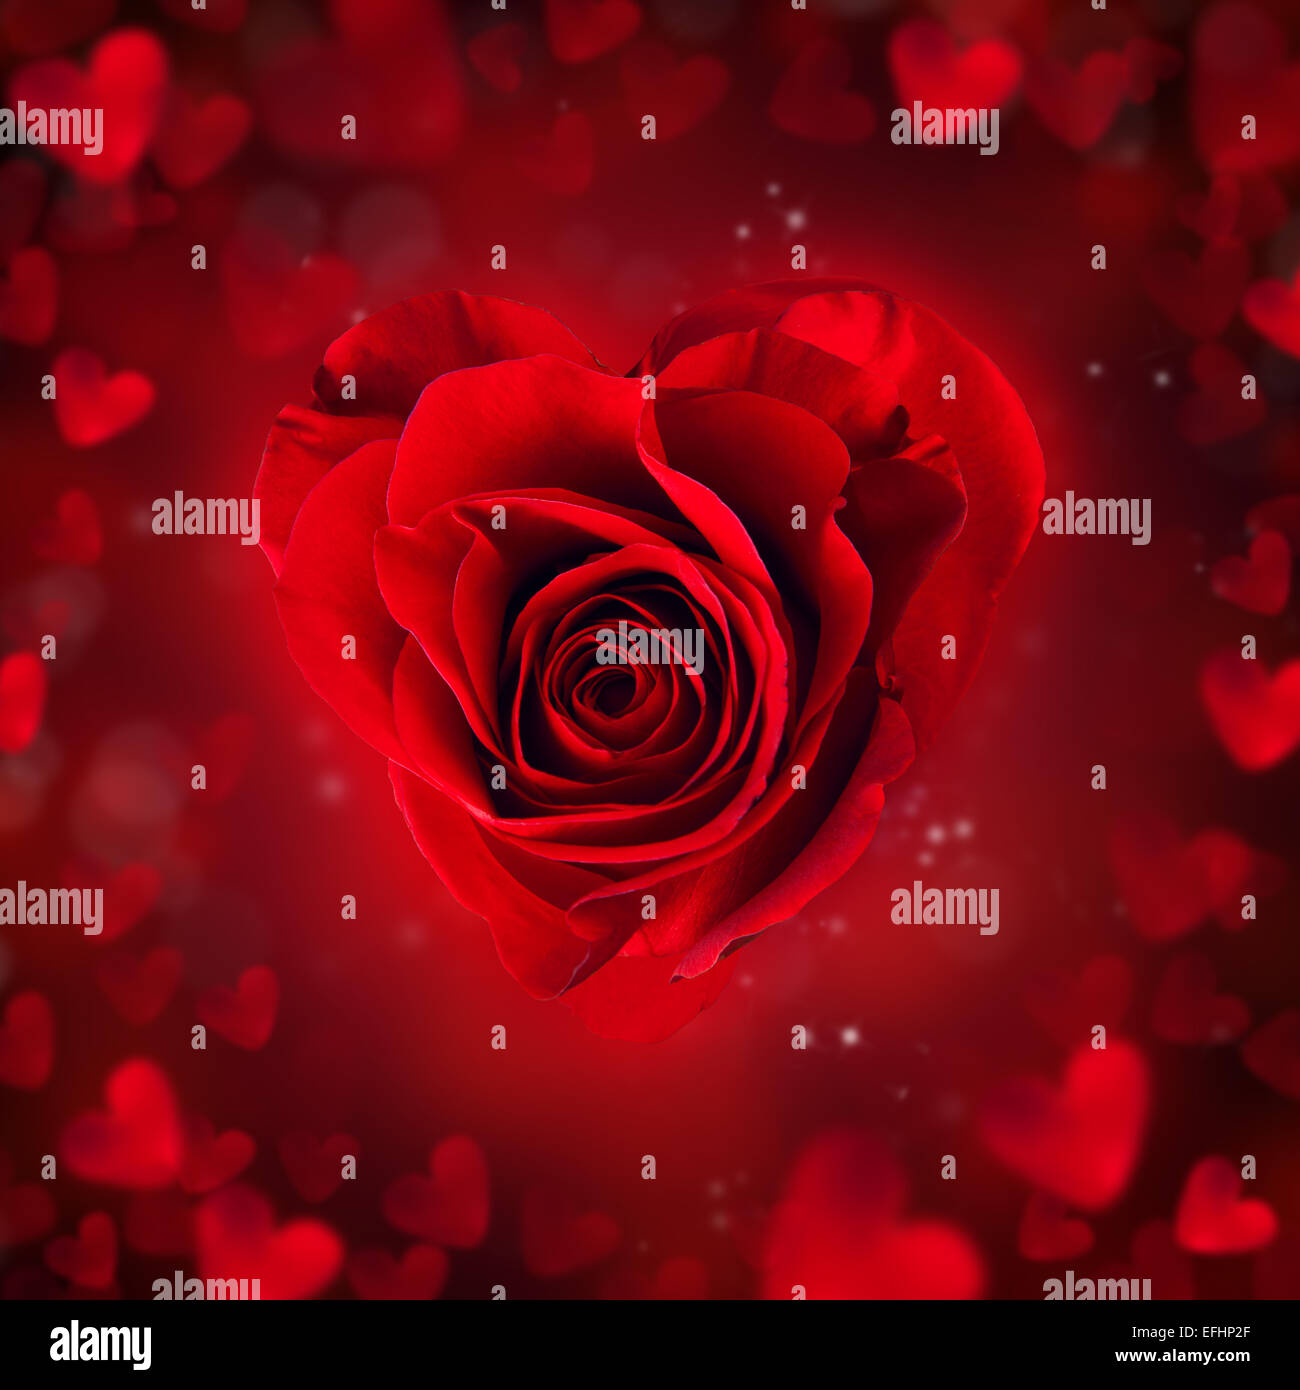 Red rose blossom in heart shape with abstract blur background Stock Photo